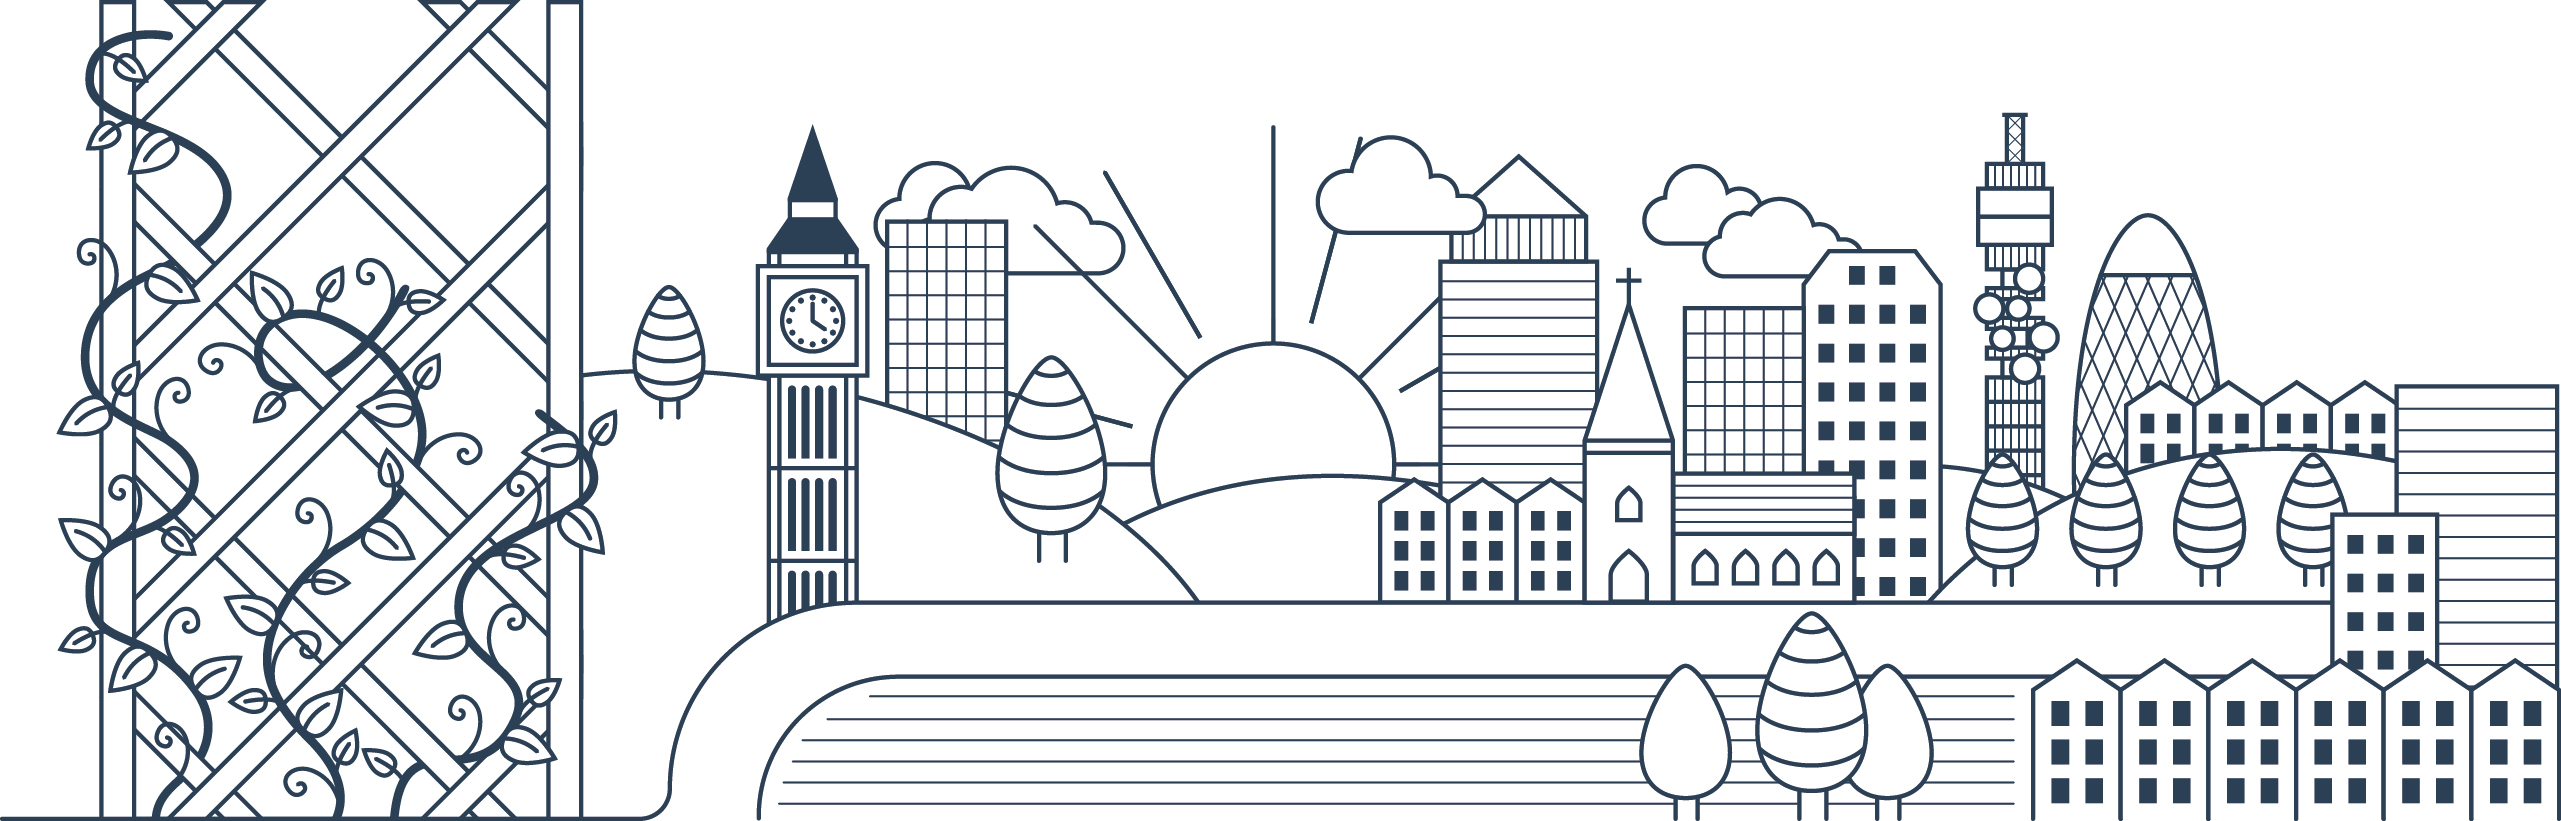 Graphic showing a road, representing our Way of Life. It is surrounded by hills, trees, houses, a church and London iconic buildings, including the Big Ben, BT Tower and Gherkin. It also displays a sunrise and some clouds in the sky. On the left side, there is the image of a trellis with three plants of different sizes growing against it and being supported by it.